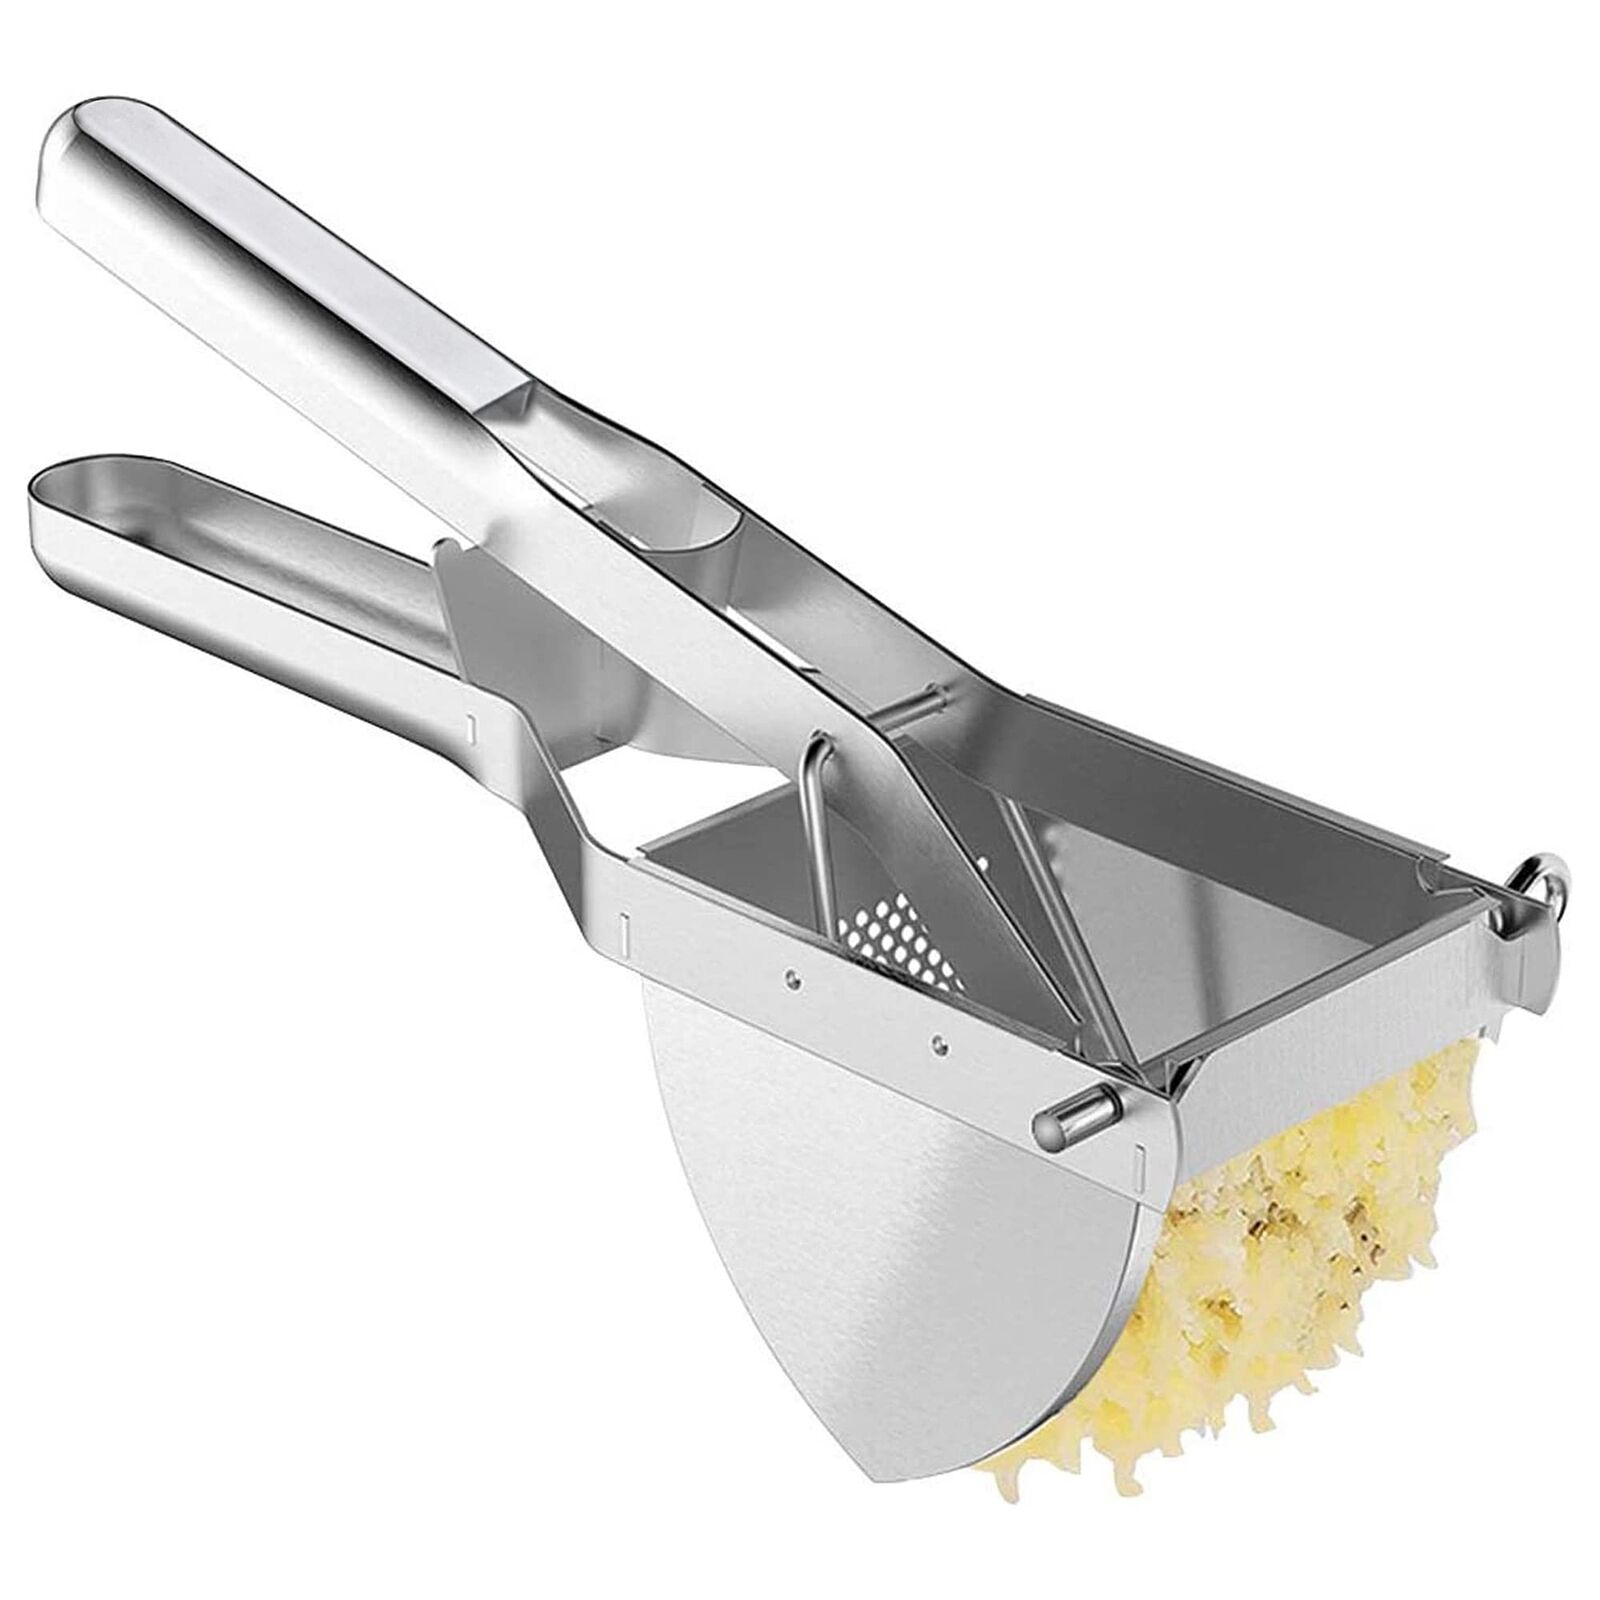 MyLifeUNIT Heavy Duty Commercial Potato Ricer, Stainless Steel Business Potat...